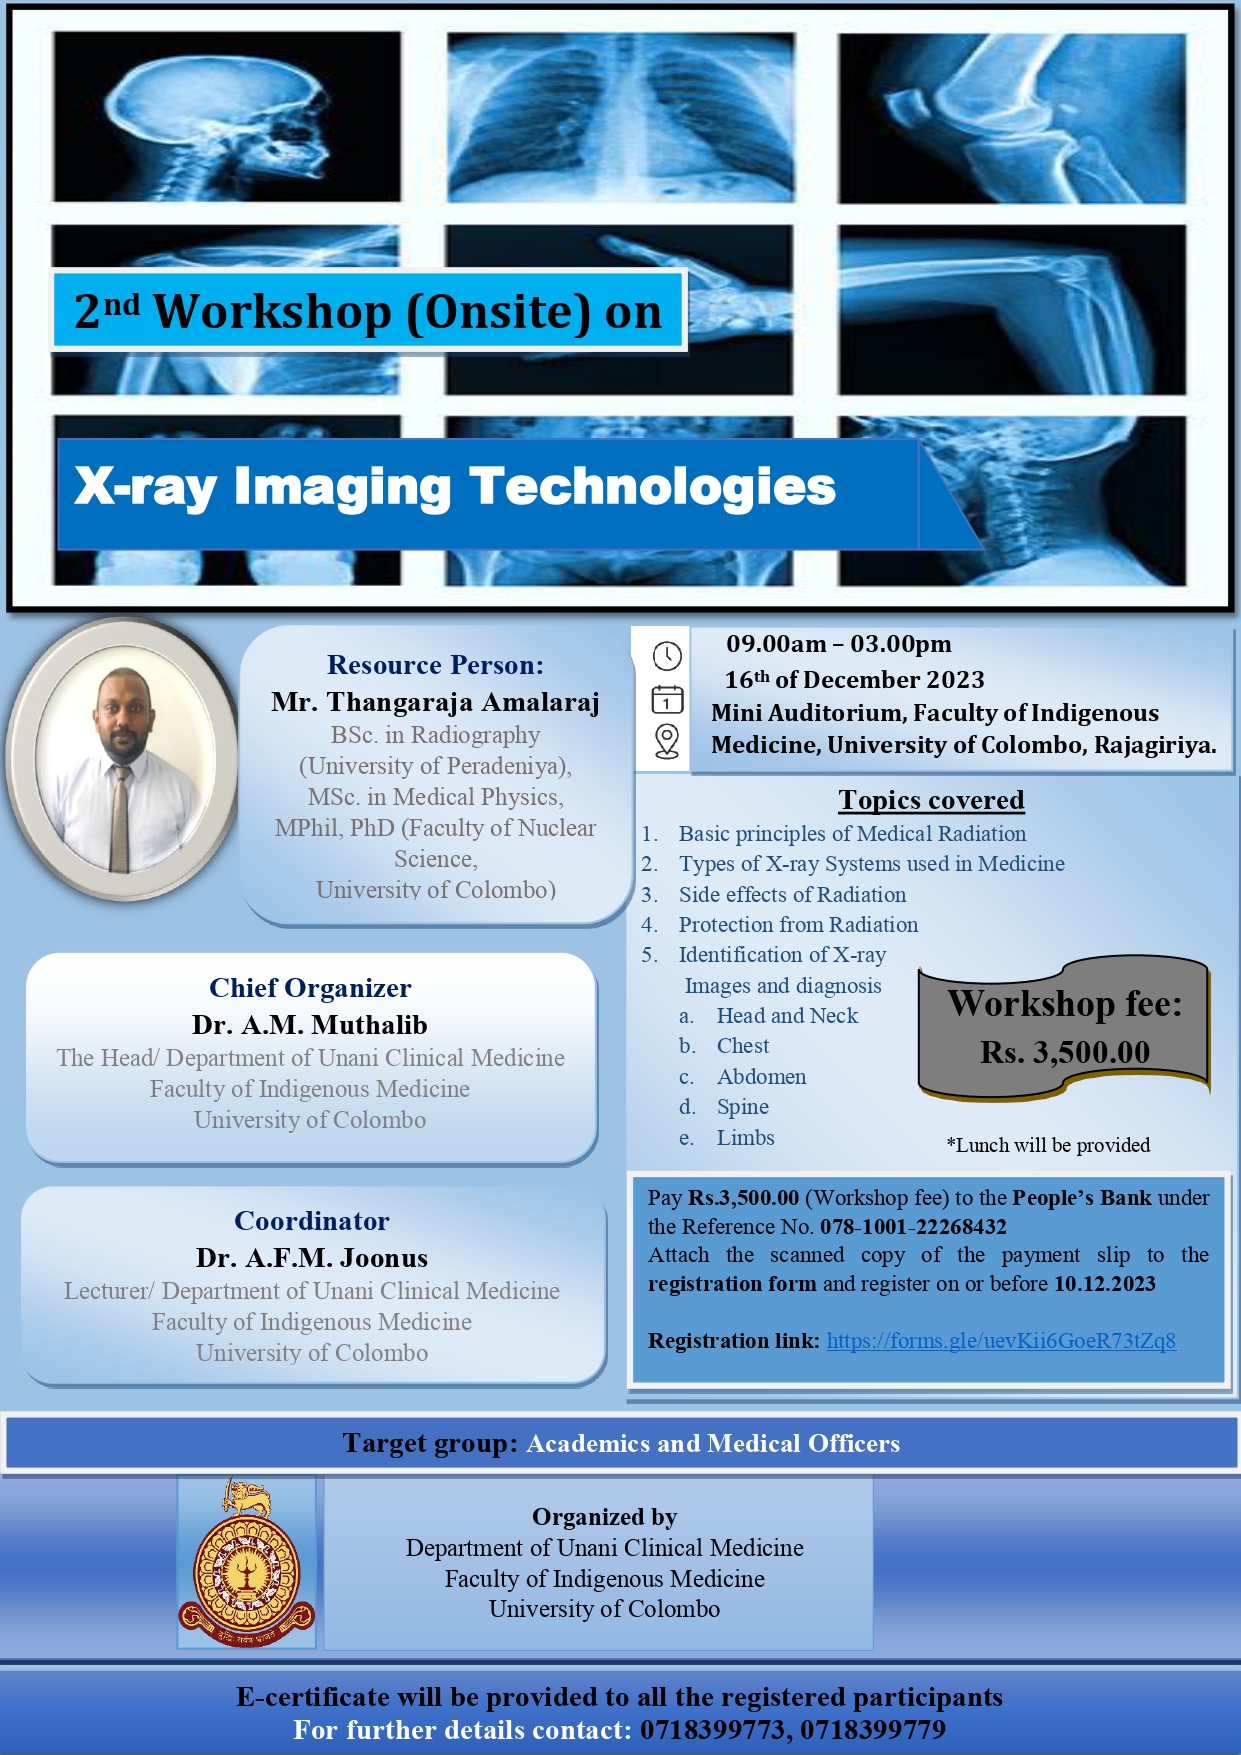 2nd workshop on X-ray Imaging Technologies